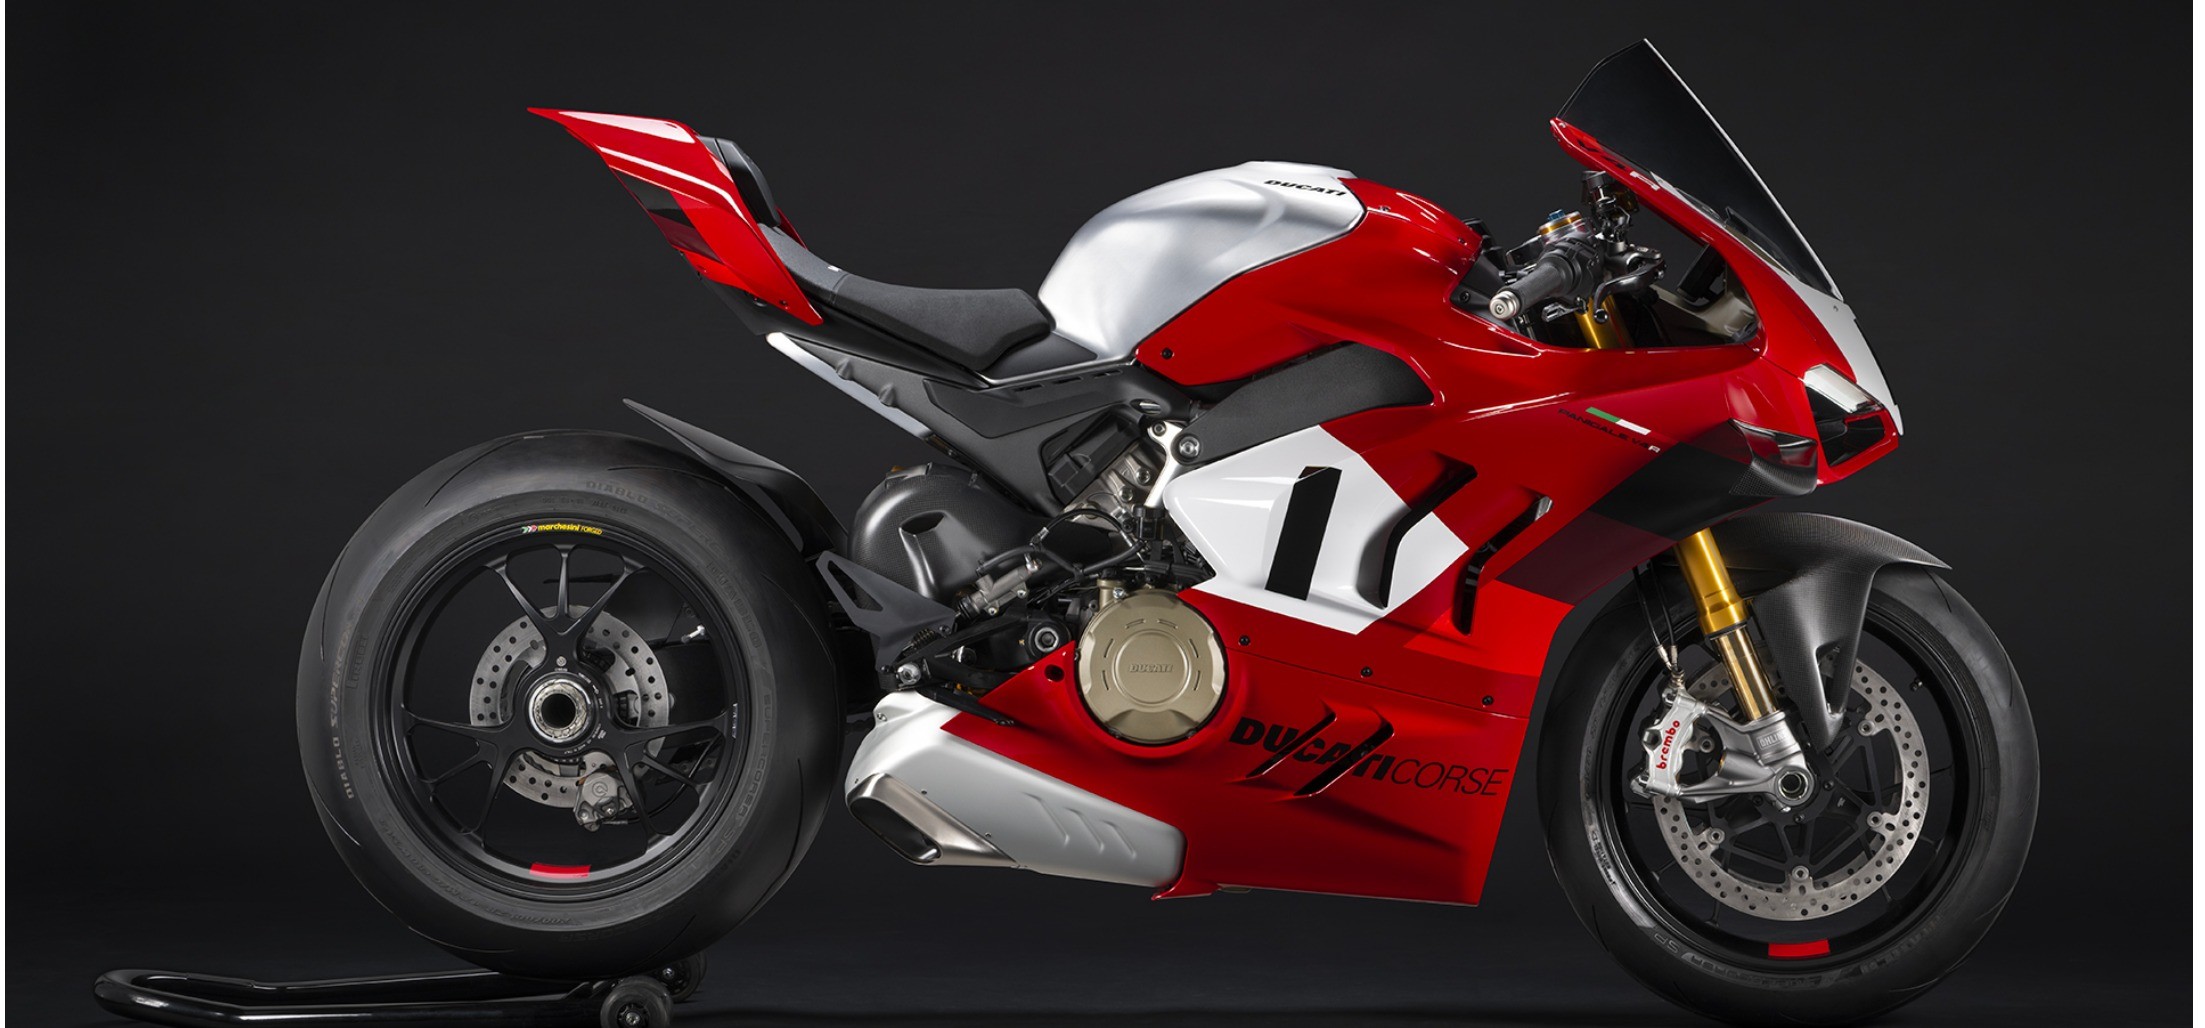 Ducati presents the new Panigale V4 R